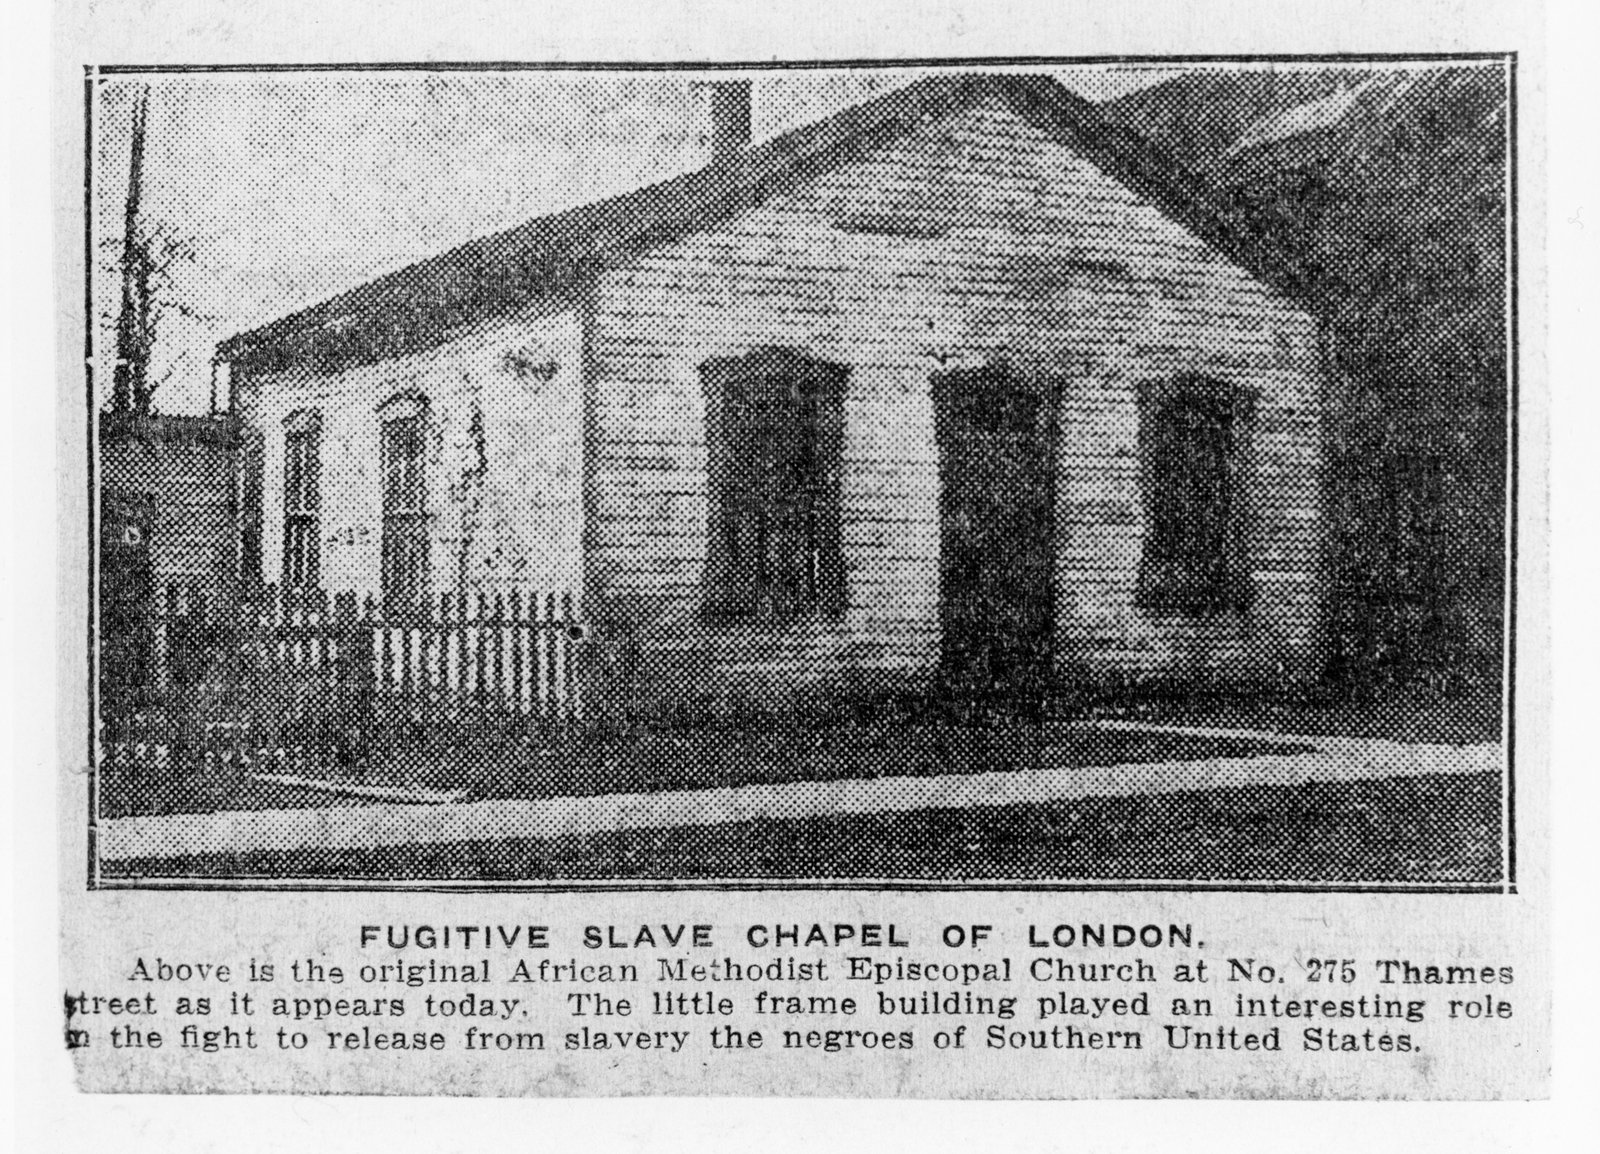 The original African Methodist Episcopal Church at No. 275 Thames Street. Photo courtest of London Library